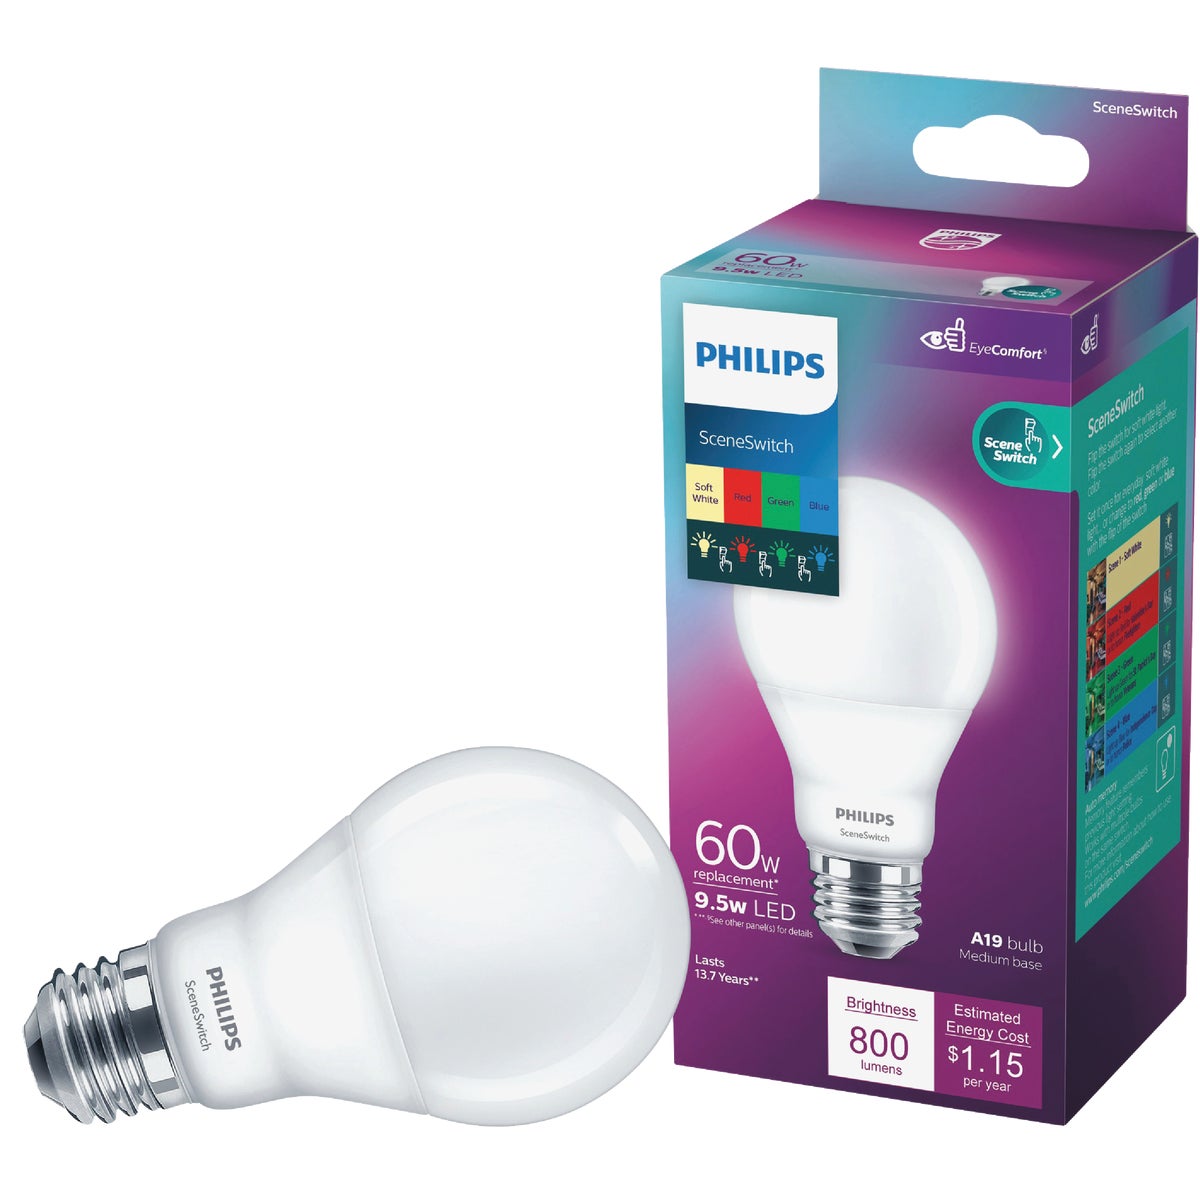 Item 511158, 1 LED (light emitting diode) light bulb with 4 color settings at a flip of 